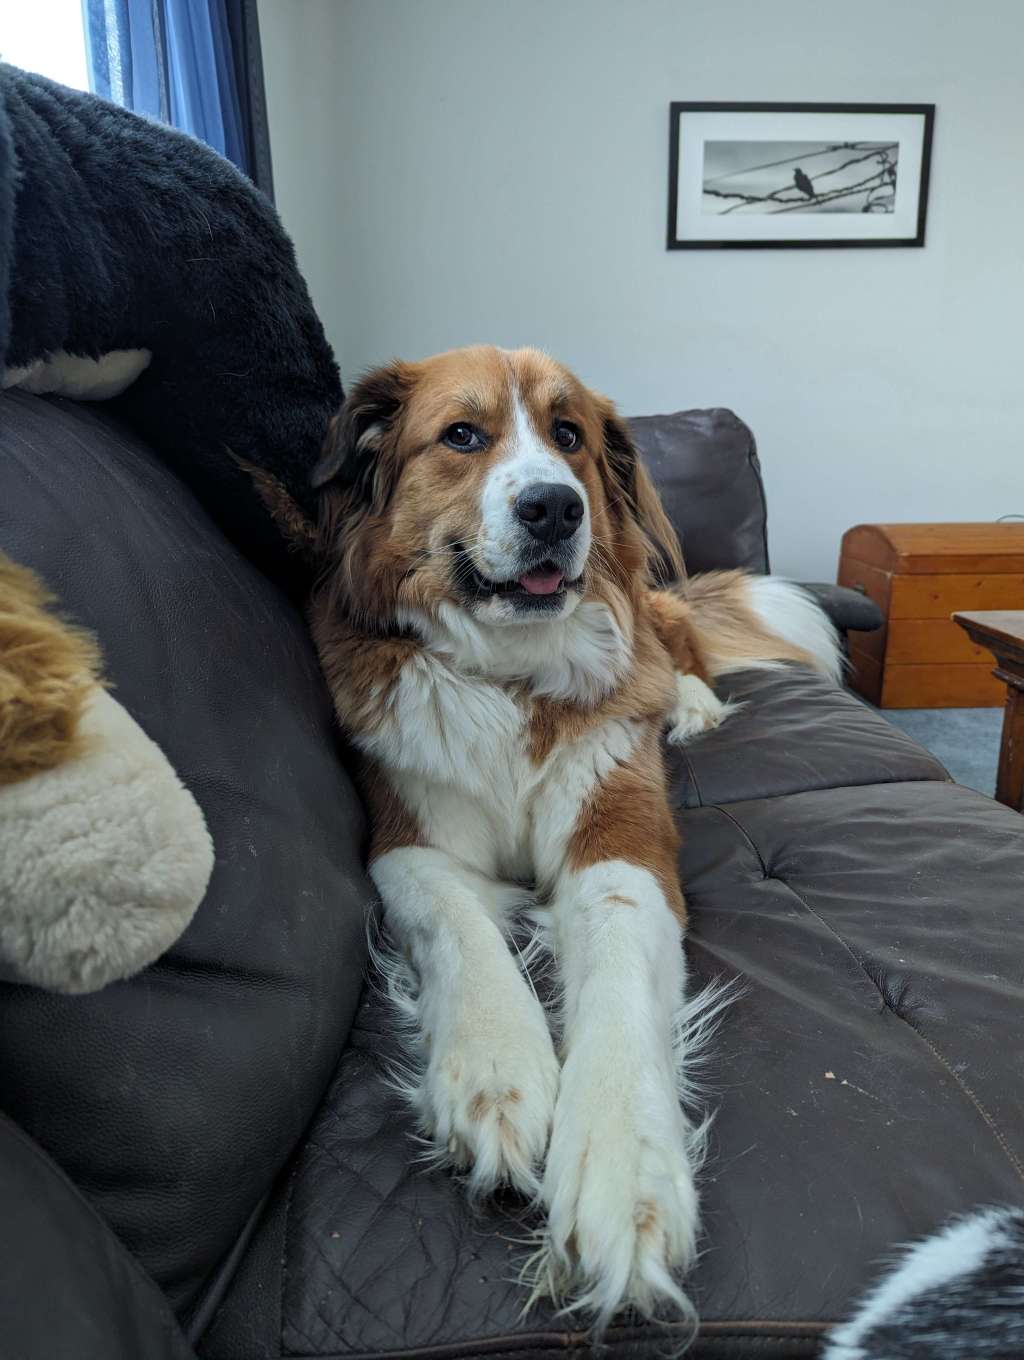 The Great Bernese: Living with a Noisy Teddy Bear on Steroids